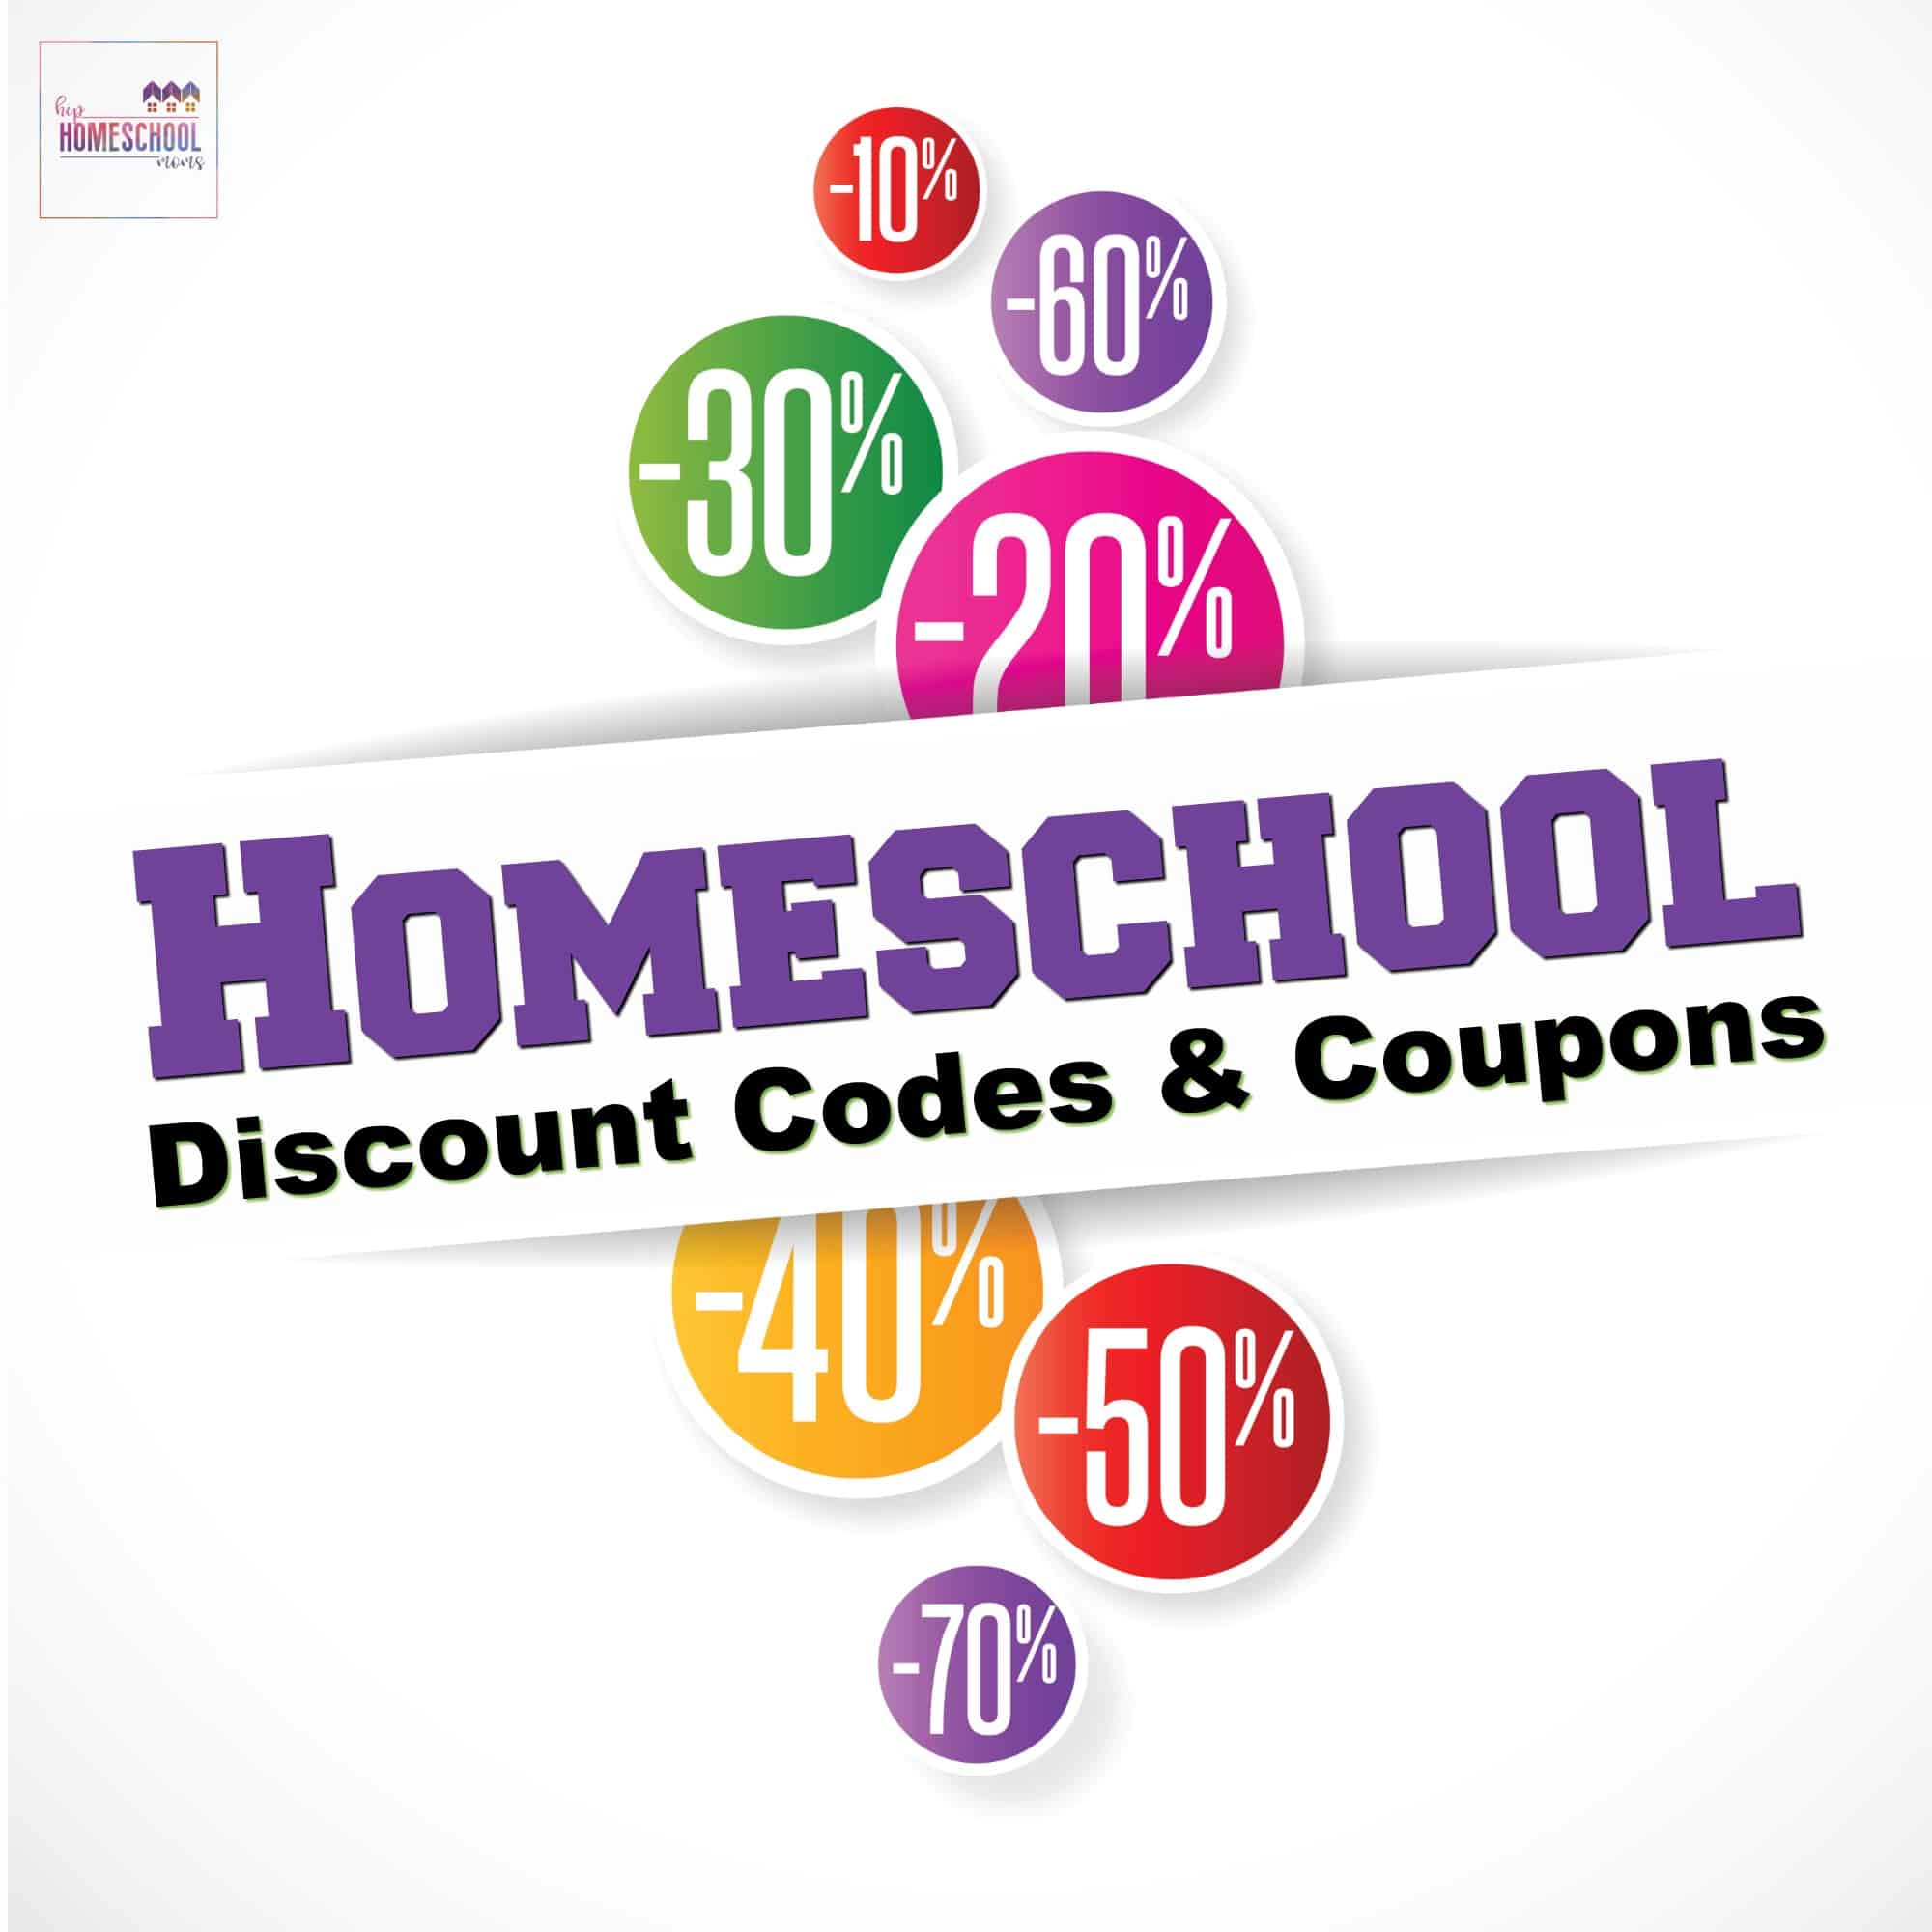 Homeschool Discount Codes and Coupons